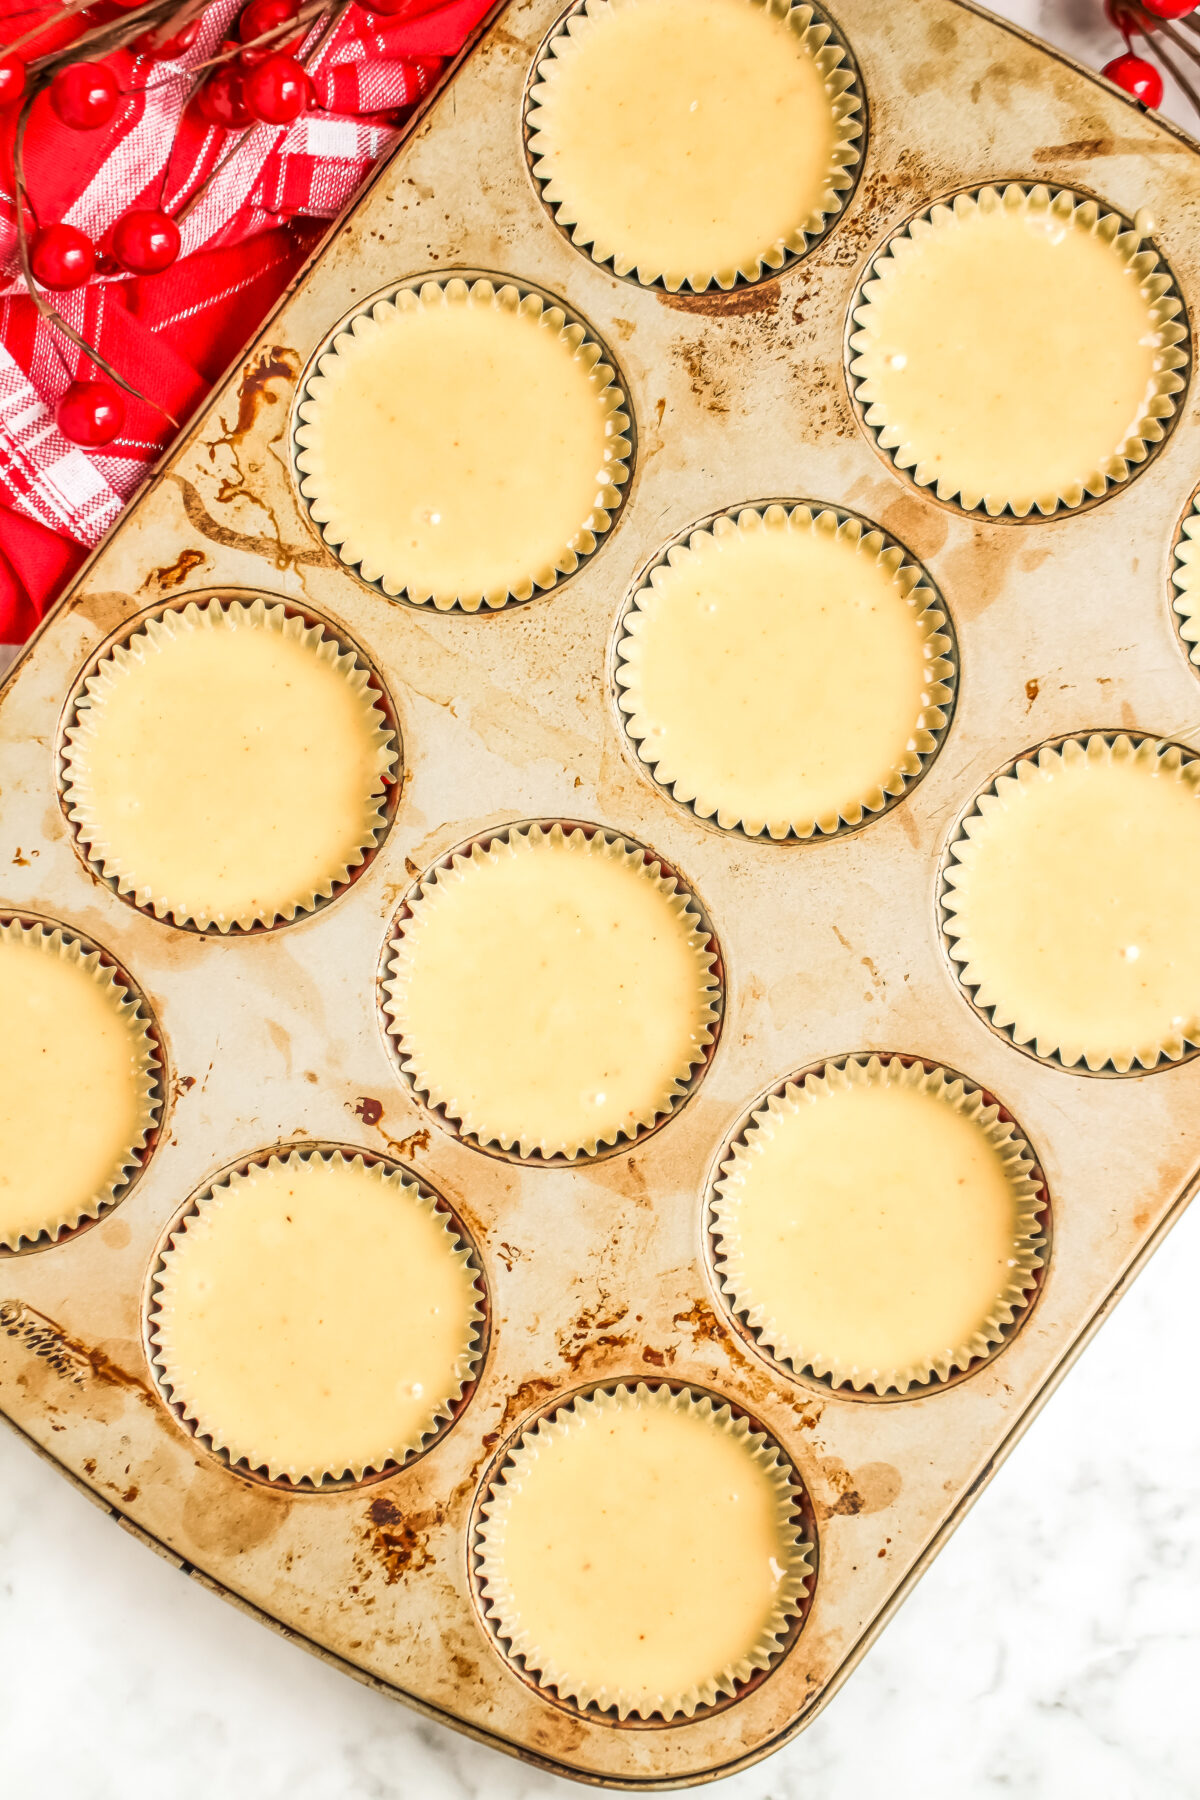 Muffin tins filled with cupcake batter.